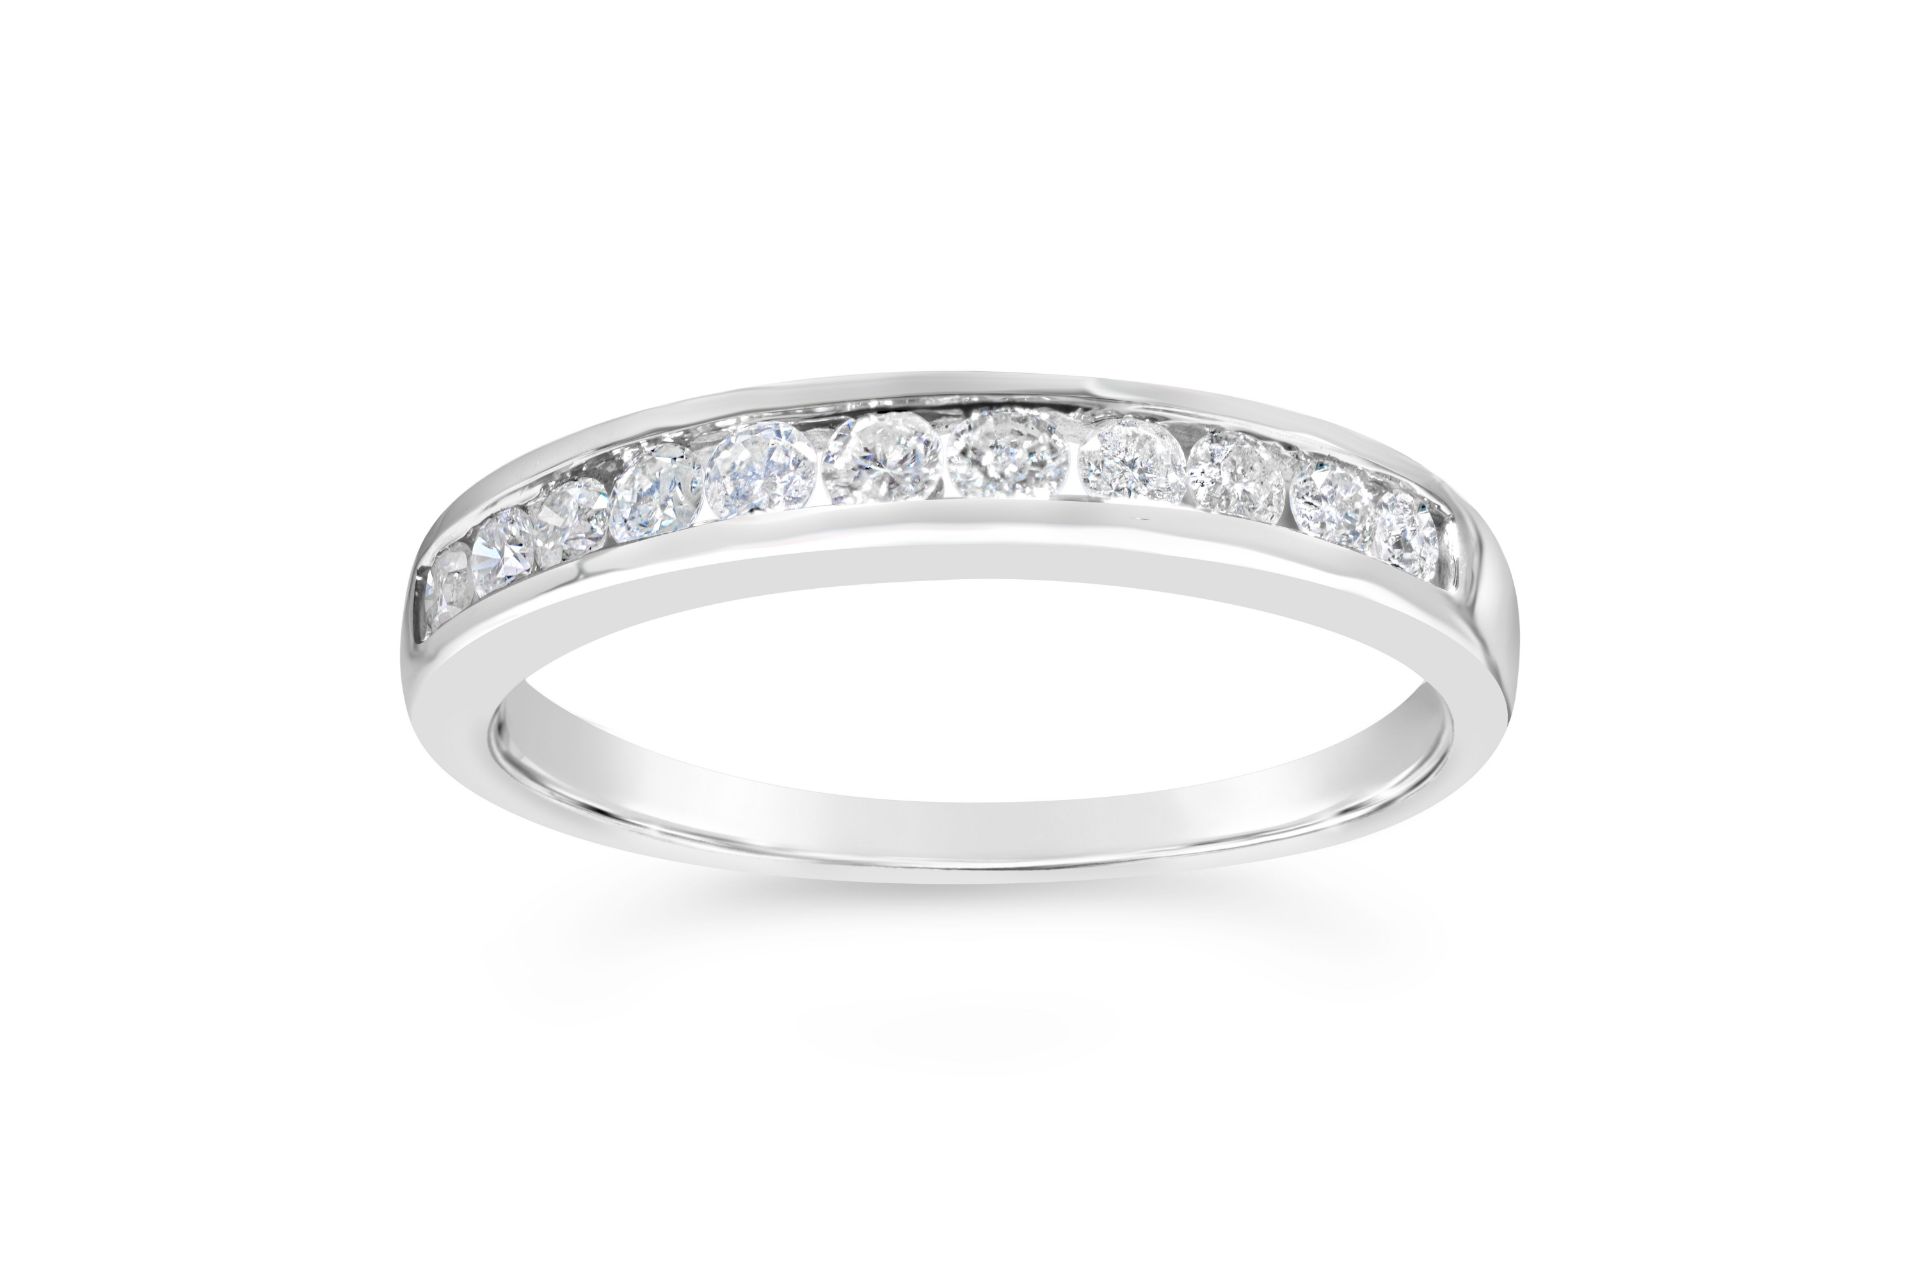 Diamond channel eternity ring, Metal 9ct White Gold, Weight 1.73, Diamond Weight (ct) 0.25, Colour